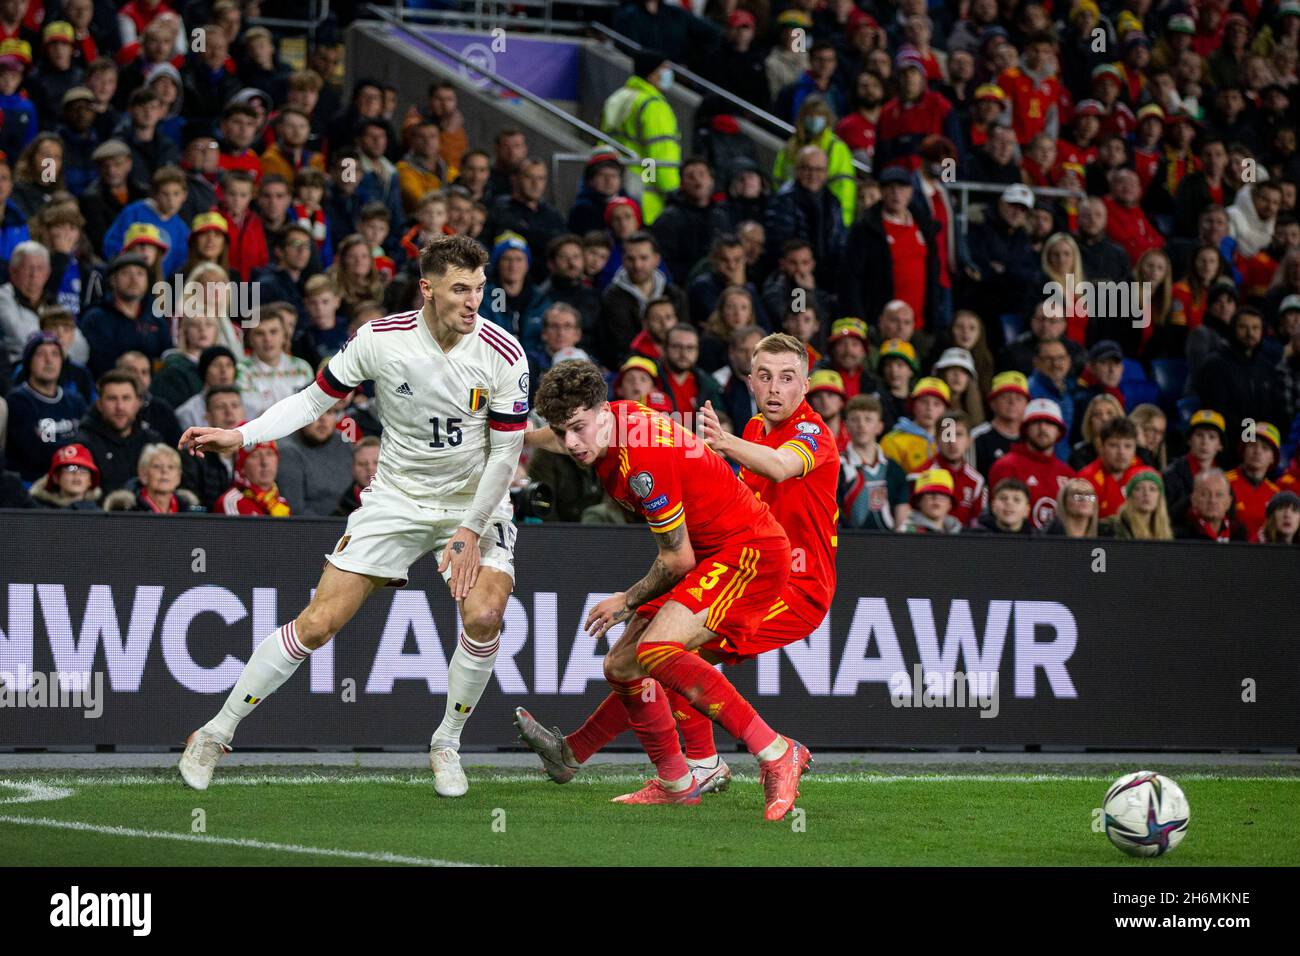 Cardiff, Wales, UK. 16th Nov, 2021. Thomas Meunier of Belgium squeezes the ball past Neco Williams and Joe Morrell of Wales during the World Cup 2022 group qualification match between Wales and Belgium at the Cardiff City Stadium. Credit: Mark Hawkins/Alamy Live News Stock Photo